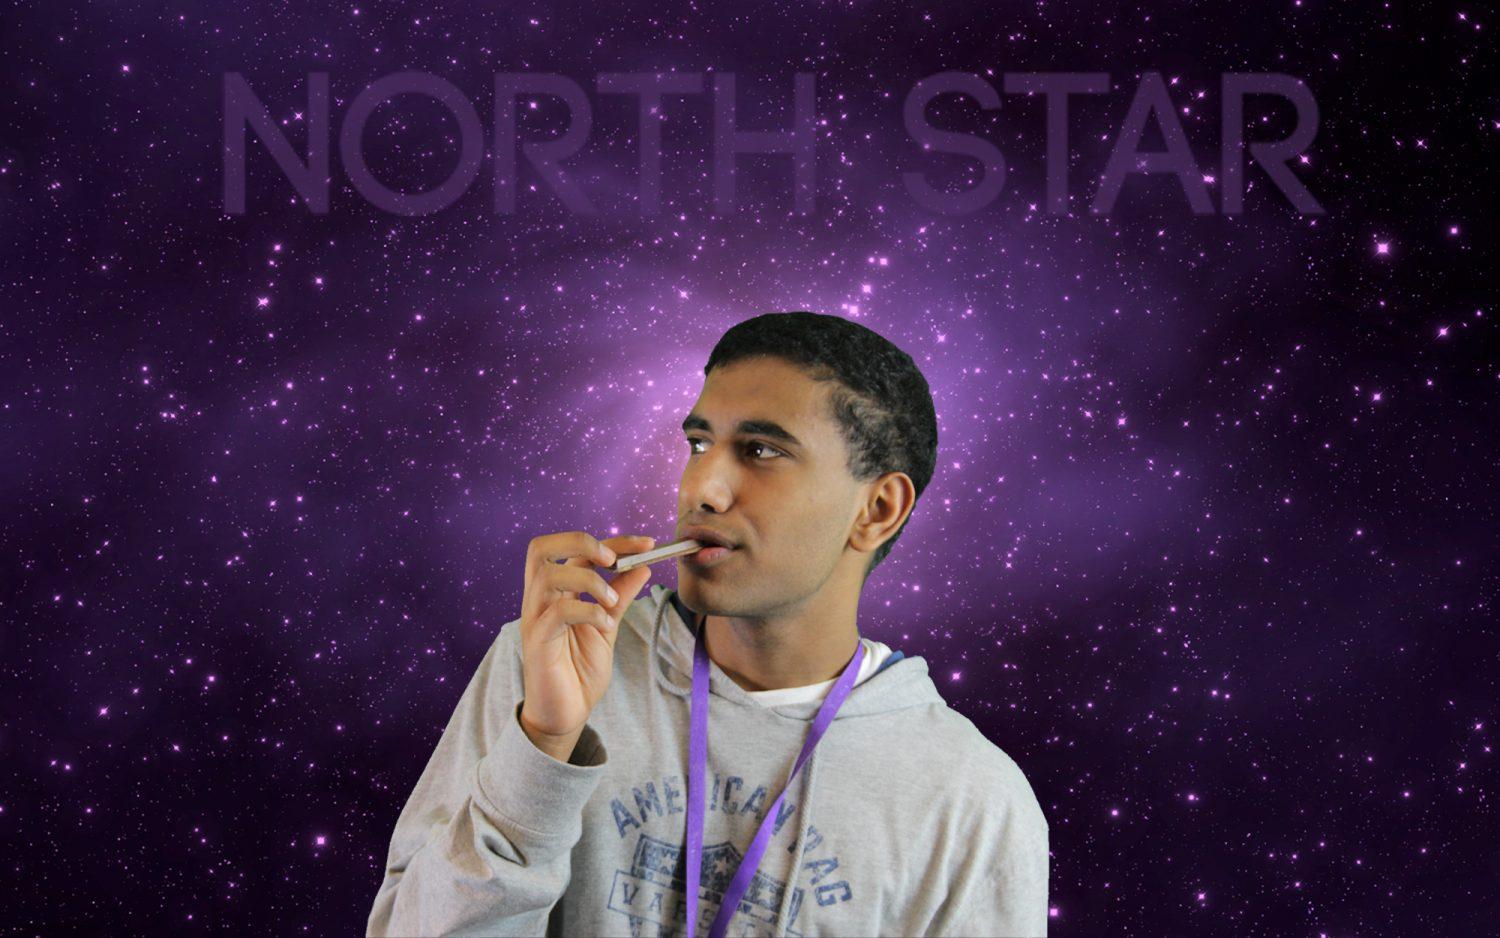 Student+activities+night%3A+North+Star+takes+students+to+space